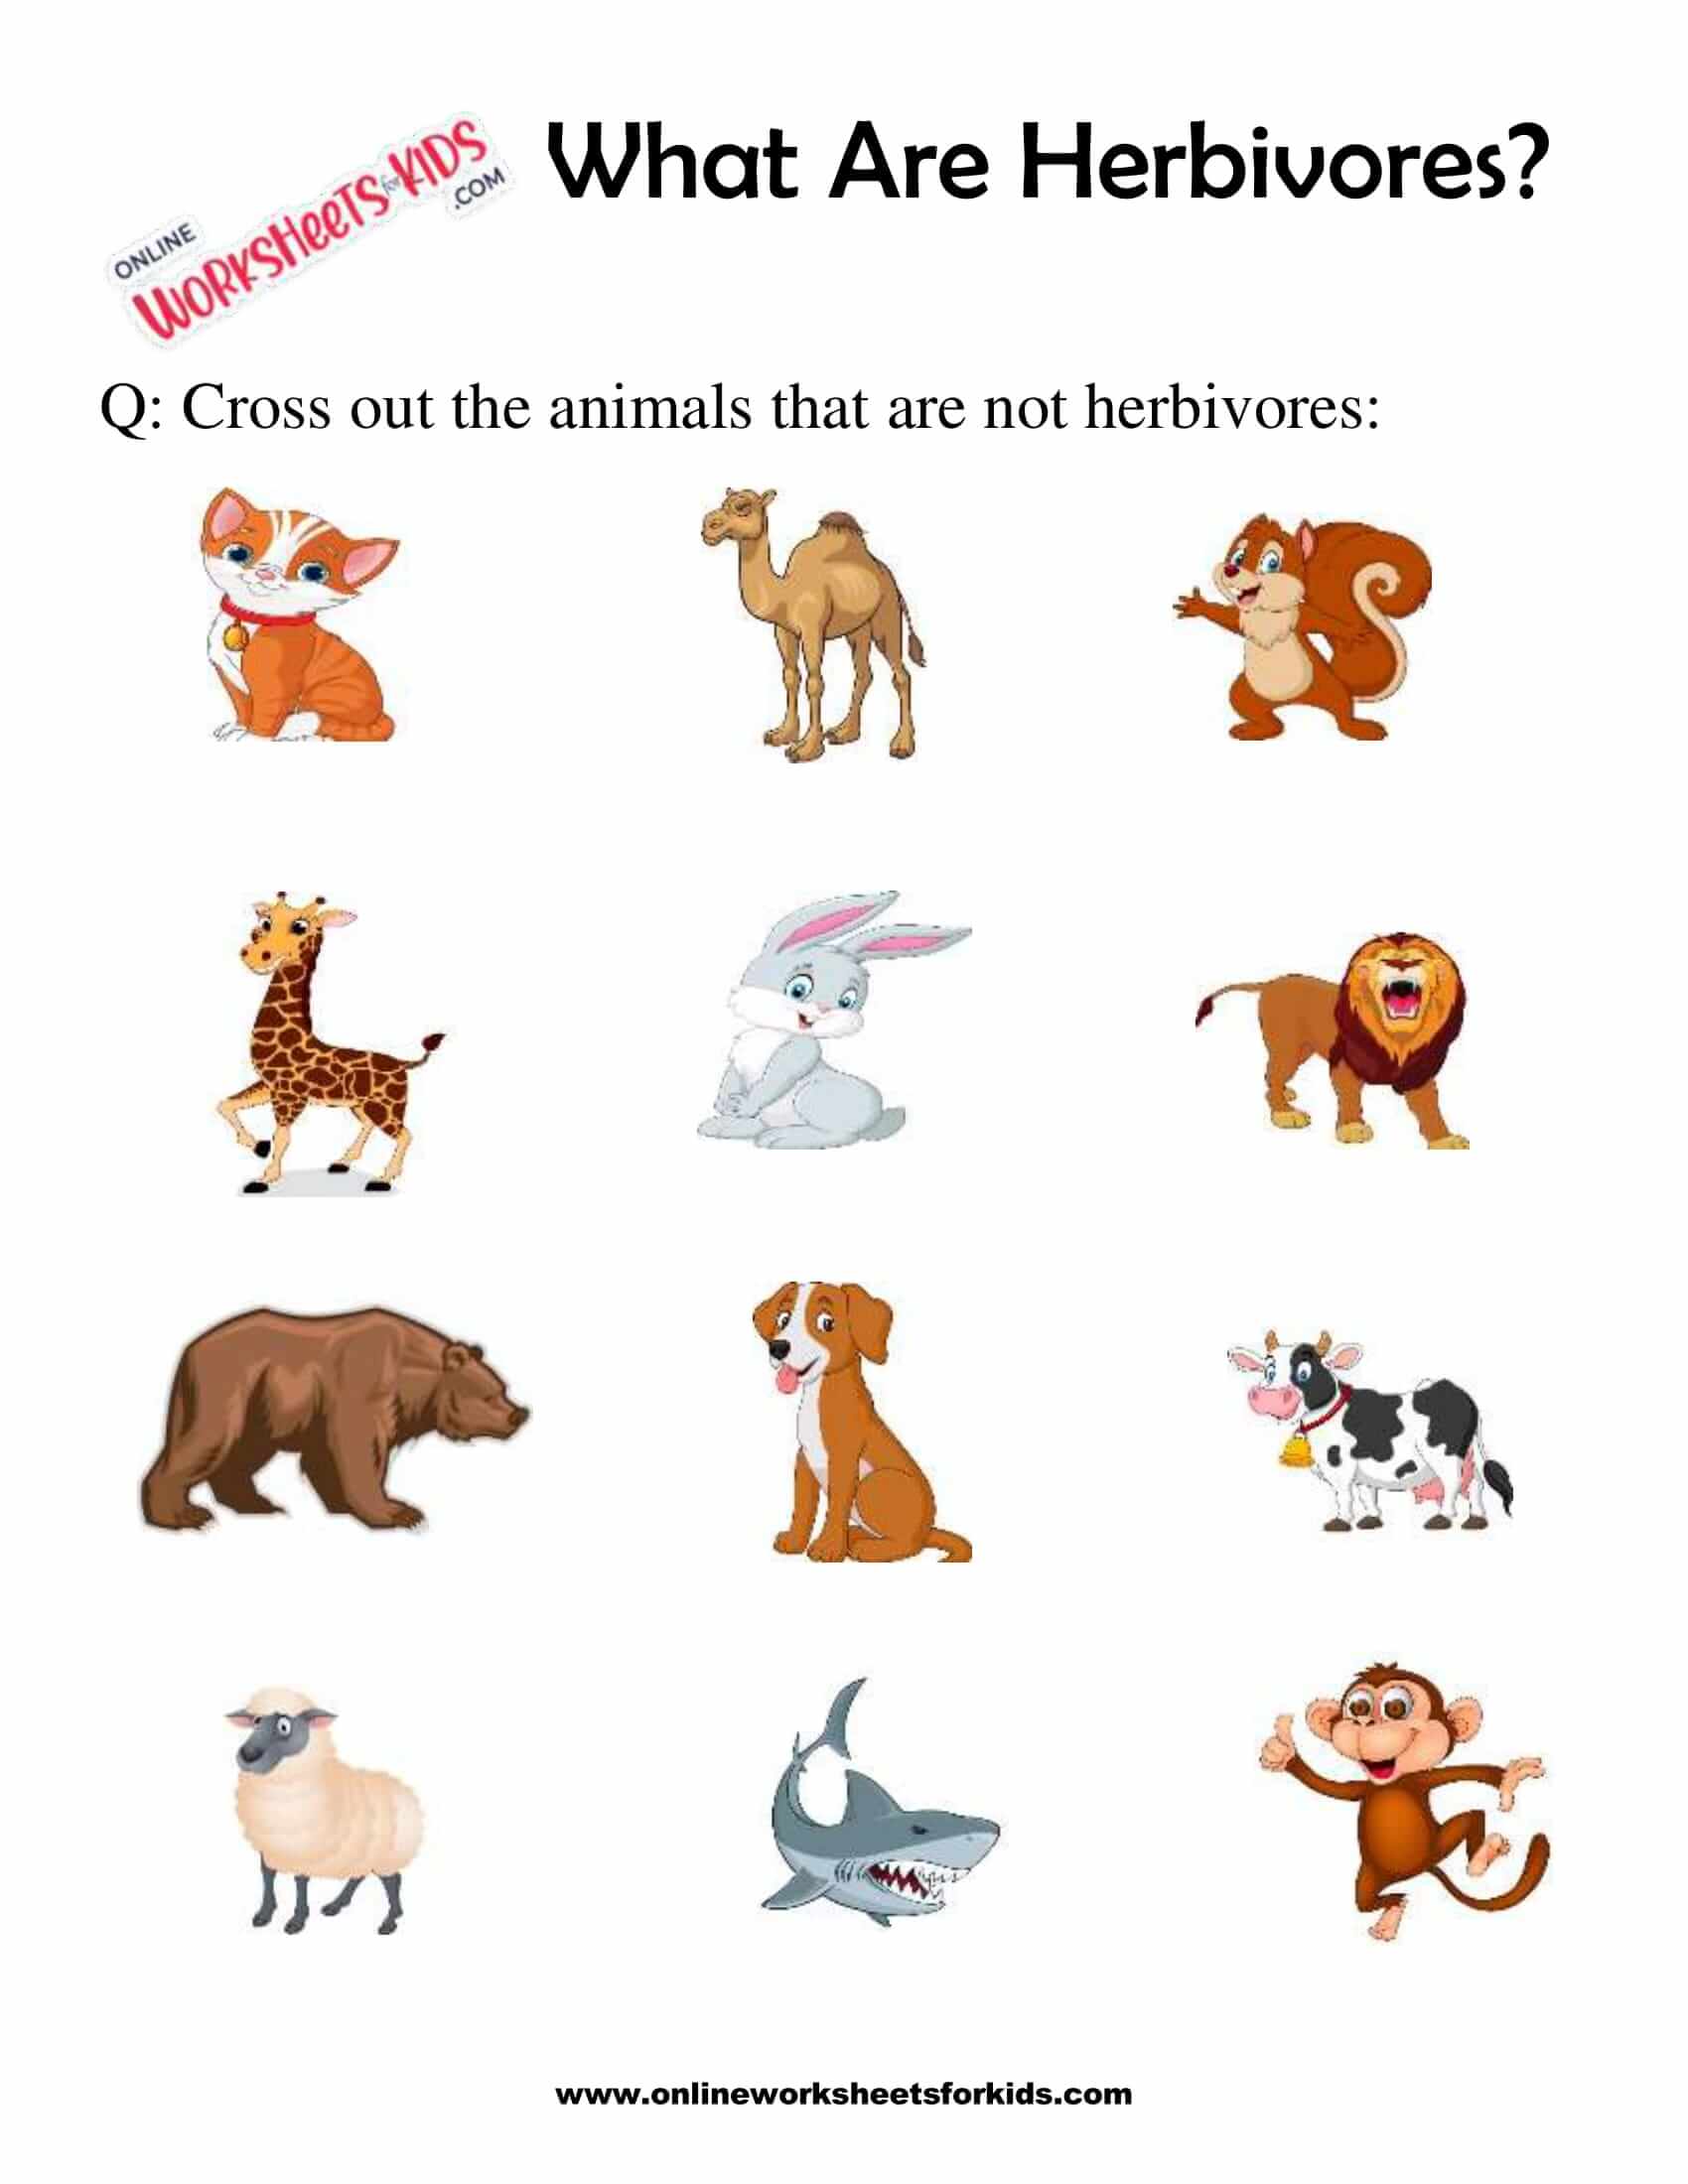 What Are Herbivores Worksheets for Grade 1